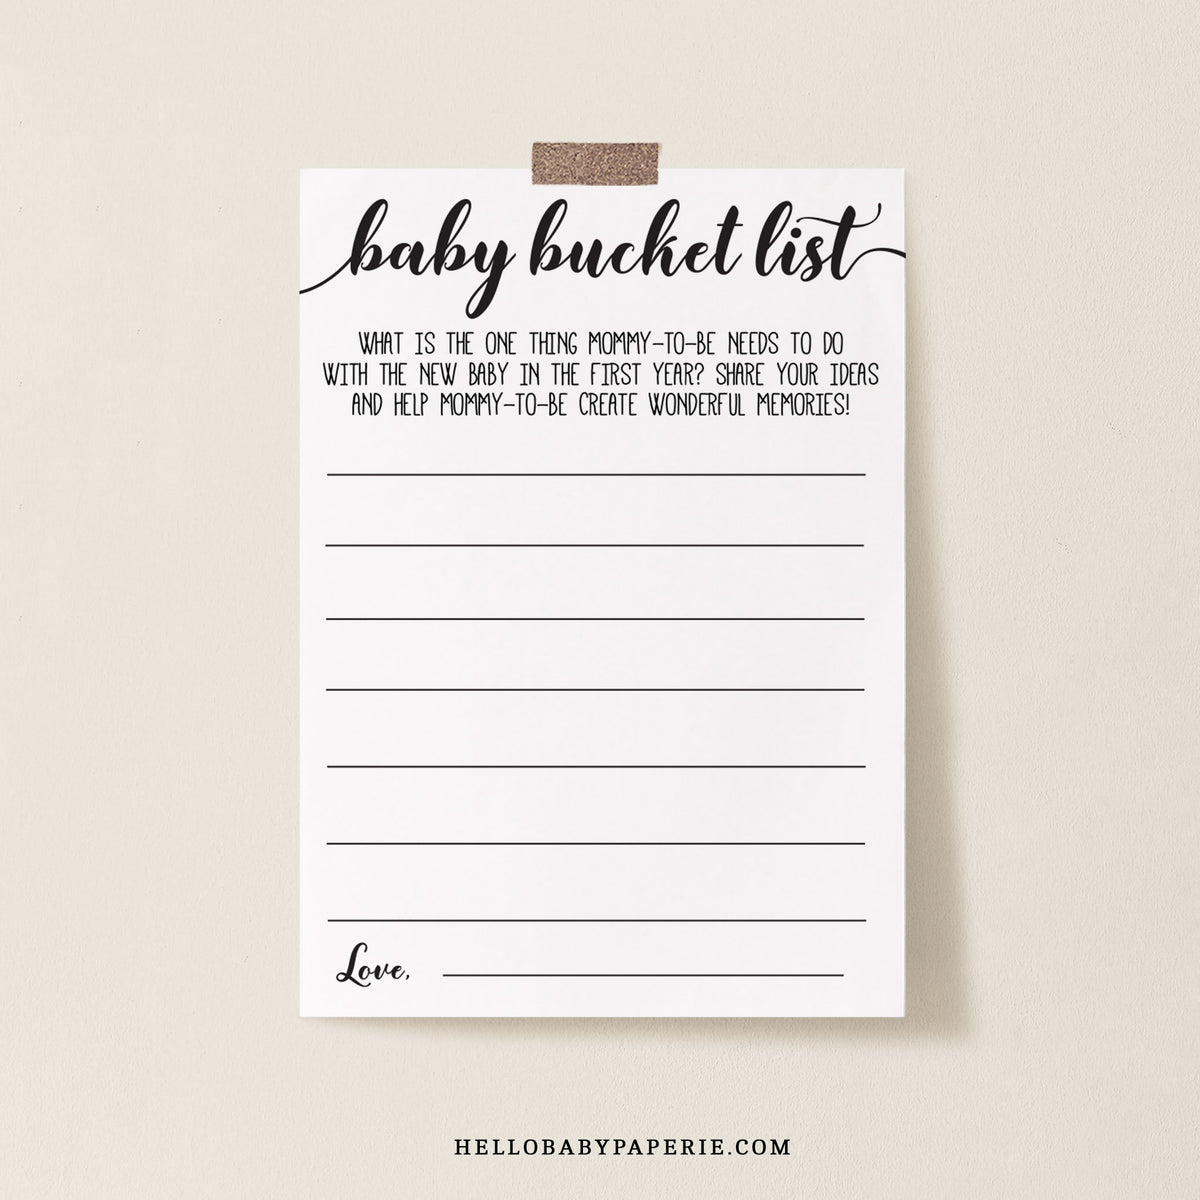 rustic-kraft-baby-bucket-list-card-template-hello-baby-paperie